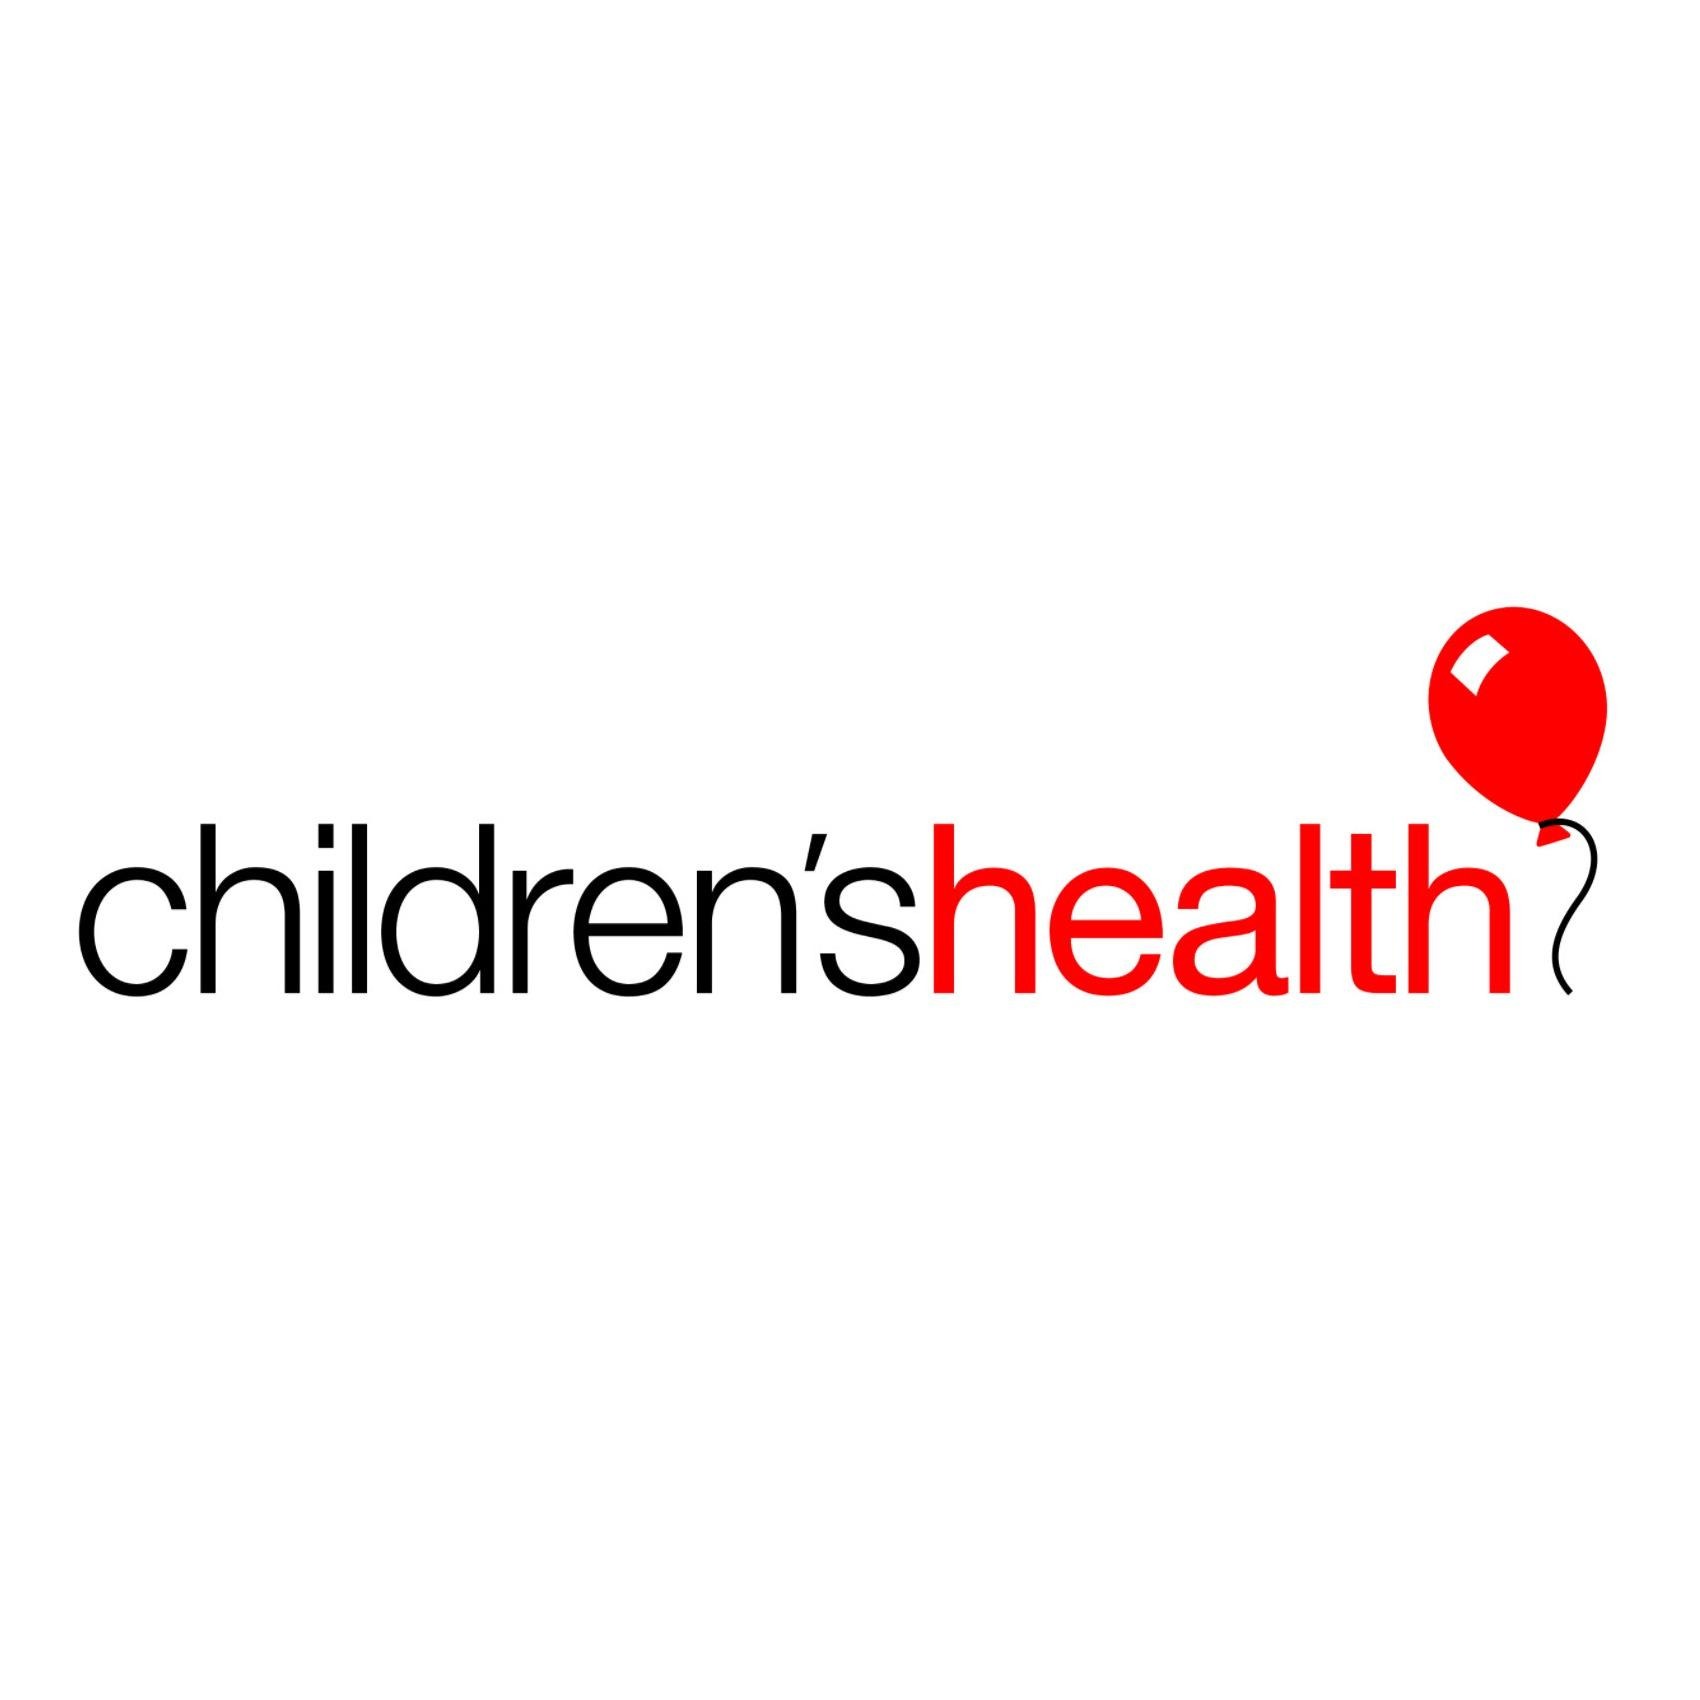 Children’s Health Redesigns, Launches On-Site Search Function to Create Best-In-Class Website - Logo - https://s41078.pcdn.co/wp-content/uploads/2020/06/Childrens-Health_Website.jpg